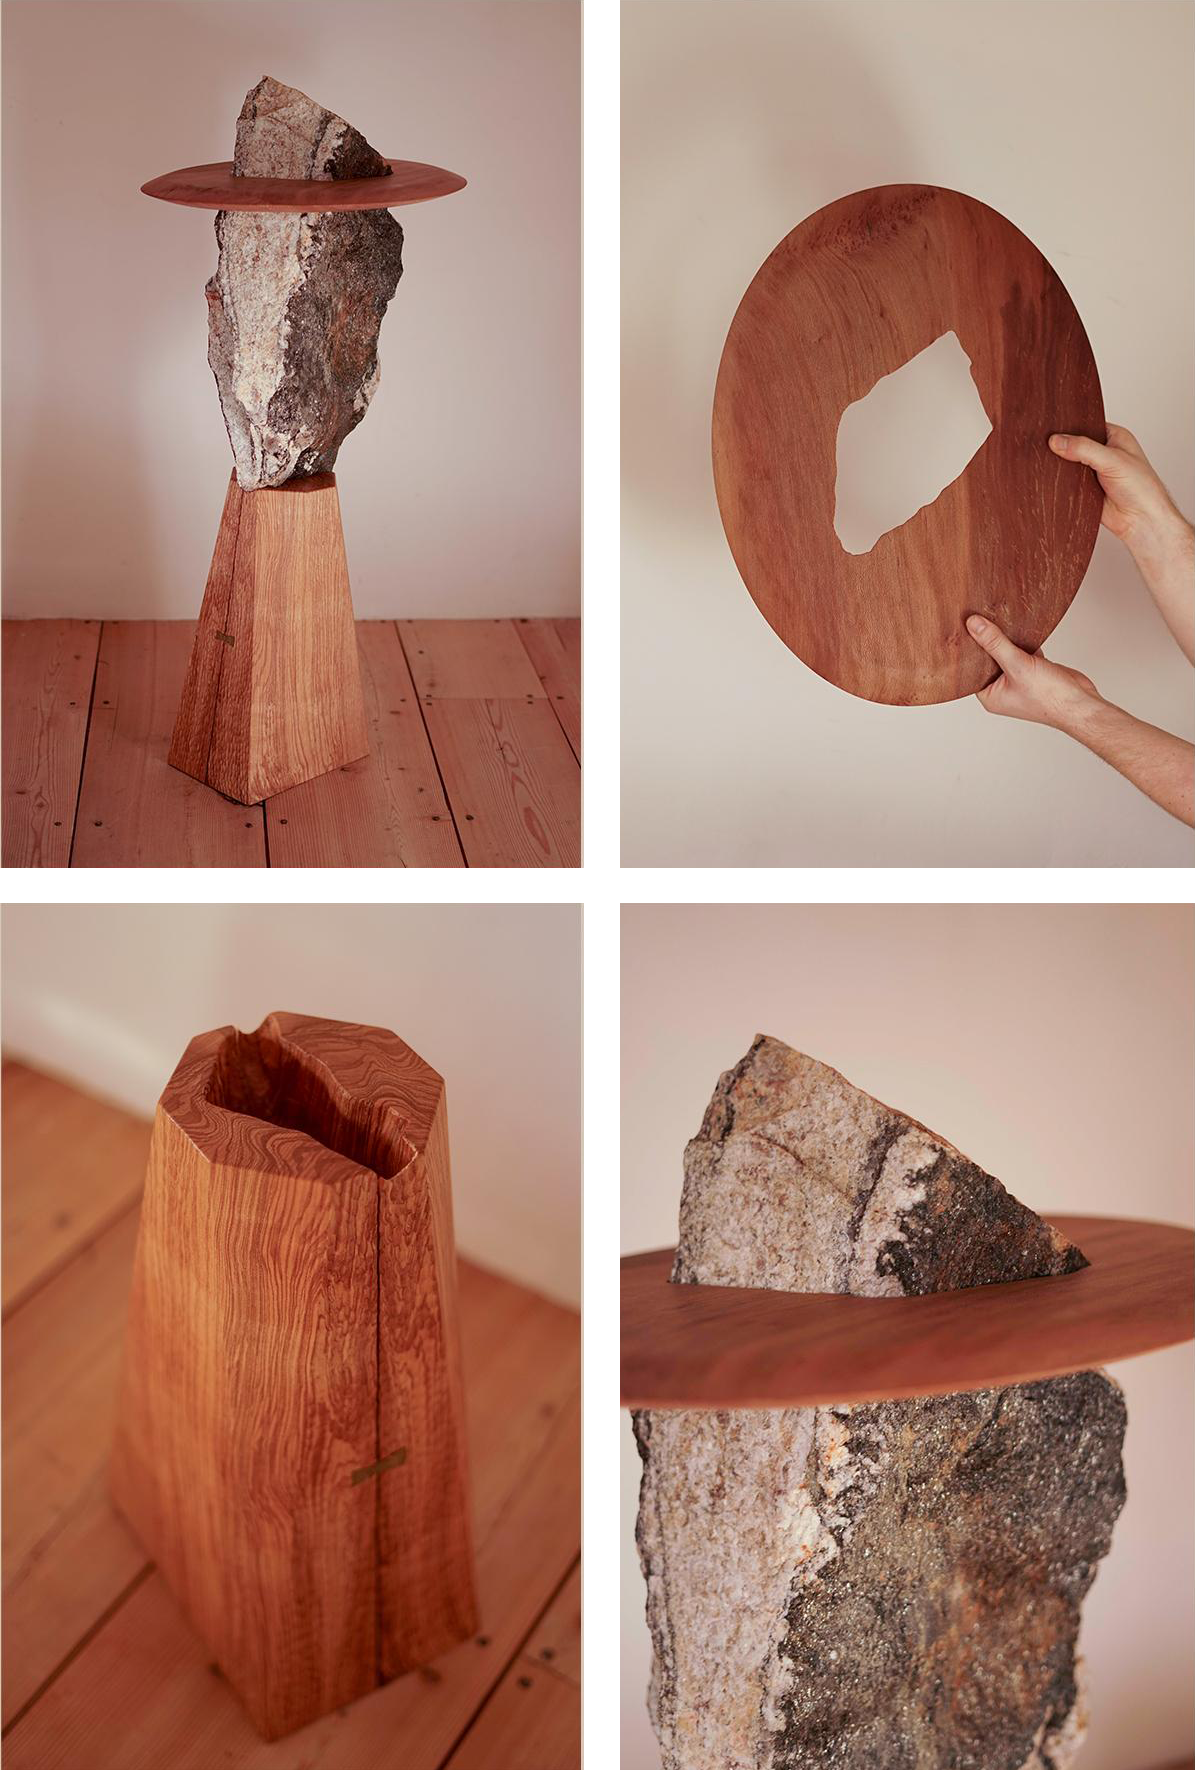  A grid of four images from Oliver Spendley's new collection. The top left image shows the piece in its entirety, the other three images are close ups of the piece, showing the wood and stone materials Oliver has used.